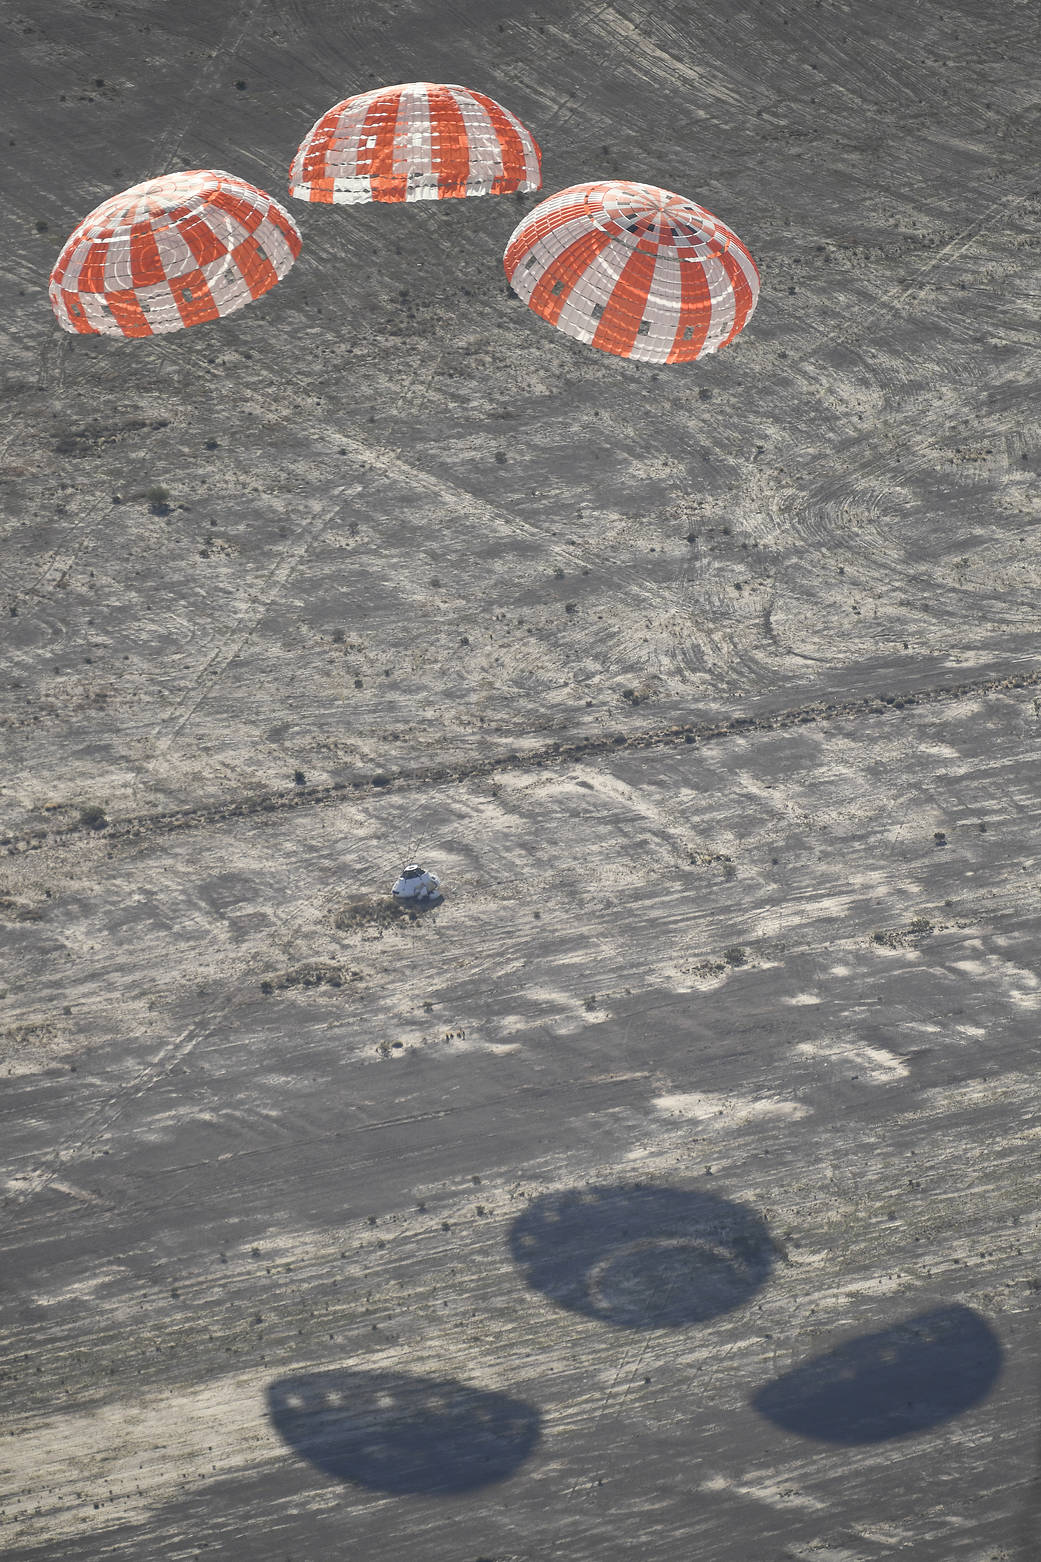 Orion capsule floats to Earth with three parachutes deployed